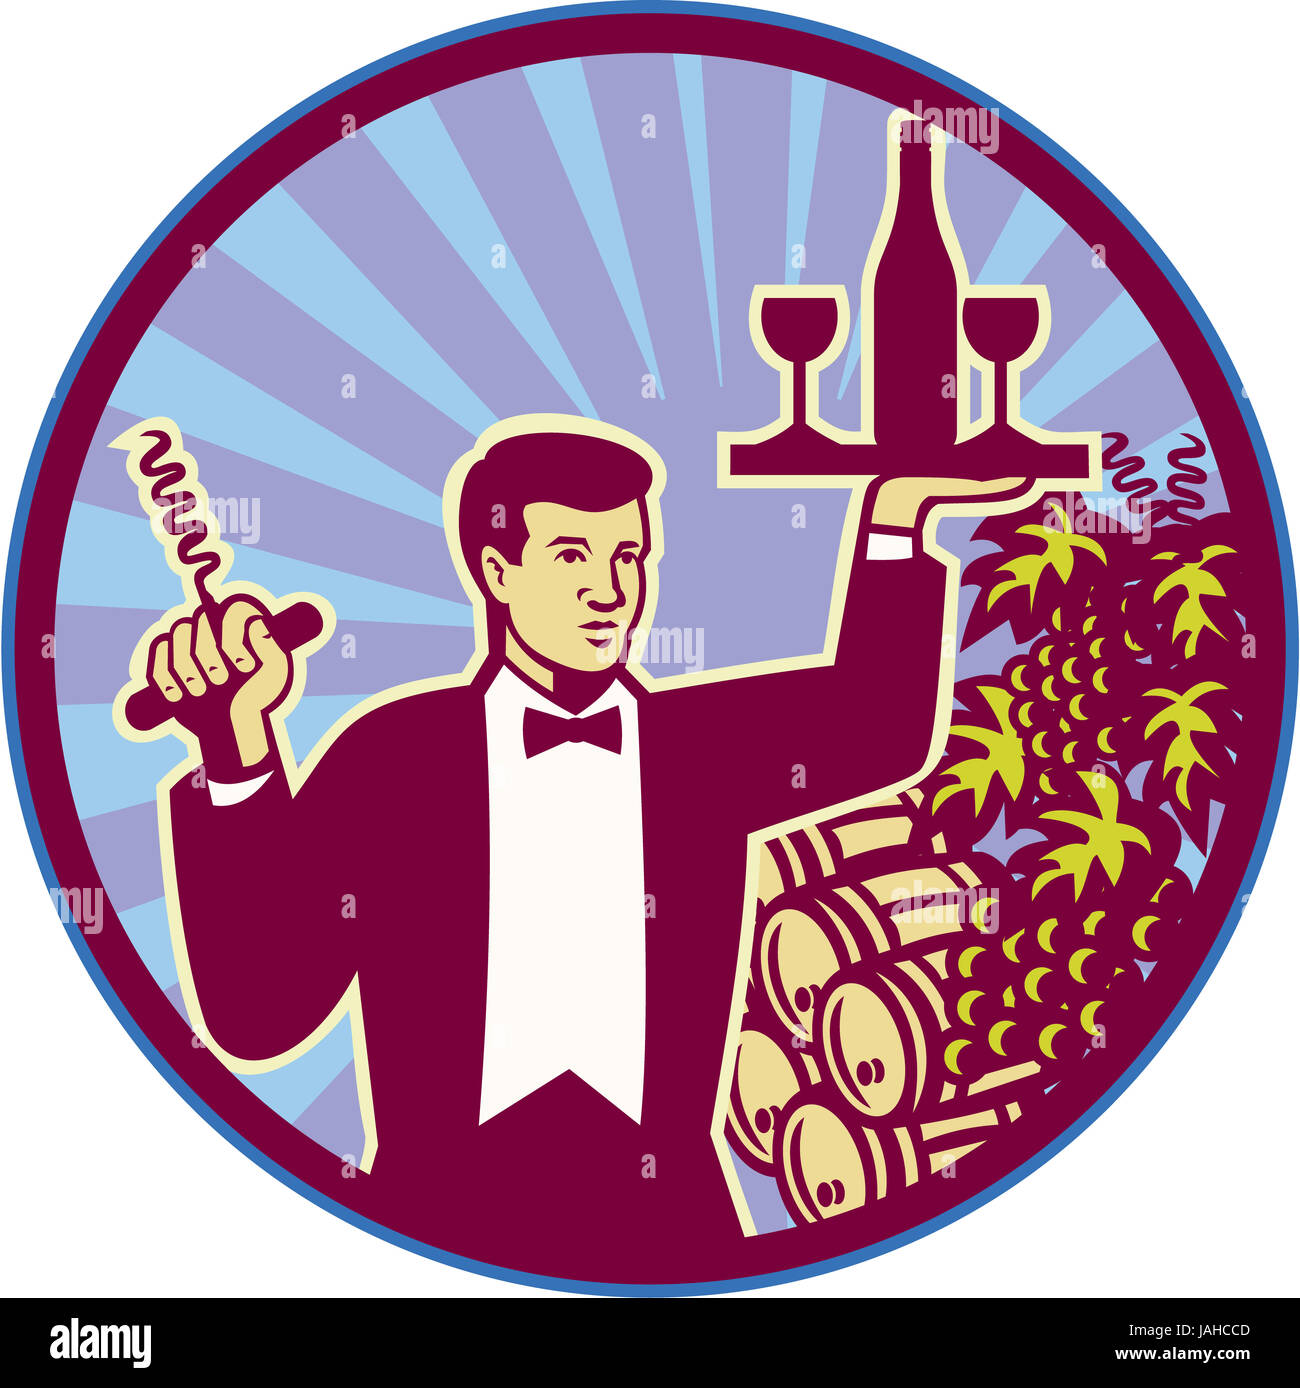 Retro style illustration of a waiter serving carrying wine glass and bottle on one hand and corkscrew on the other with wine barrels and grape vine in background set inside circle. Stock Photo